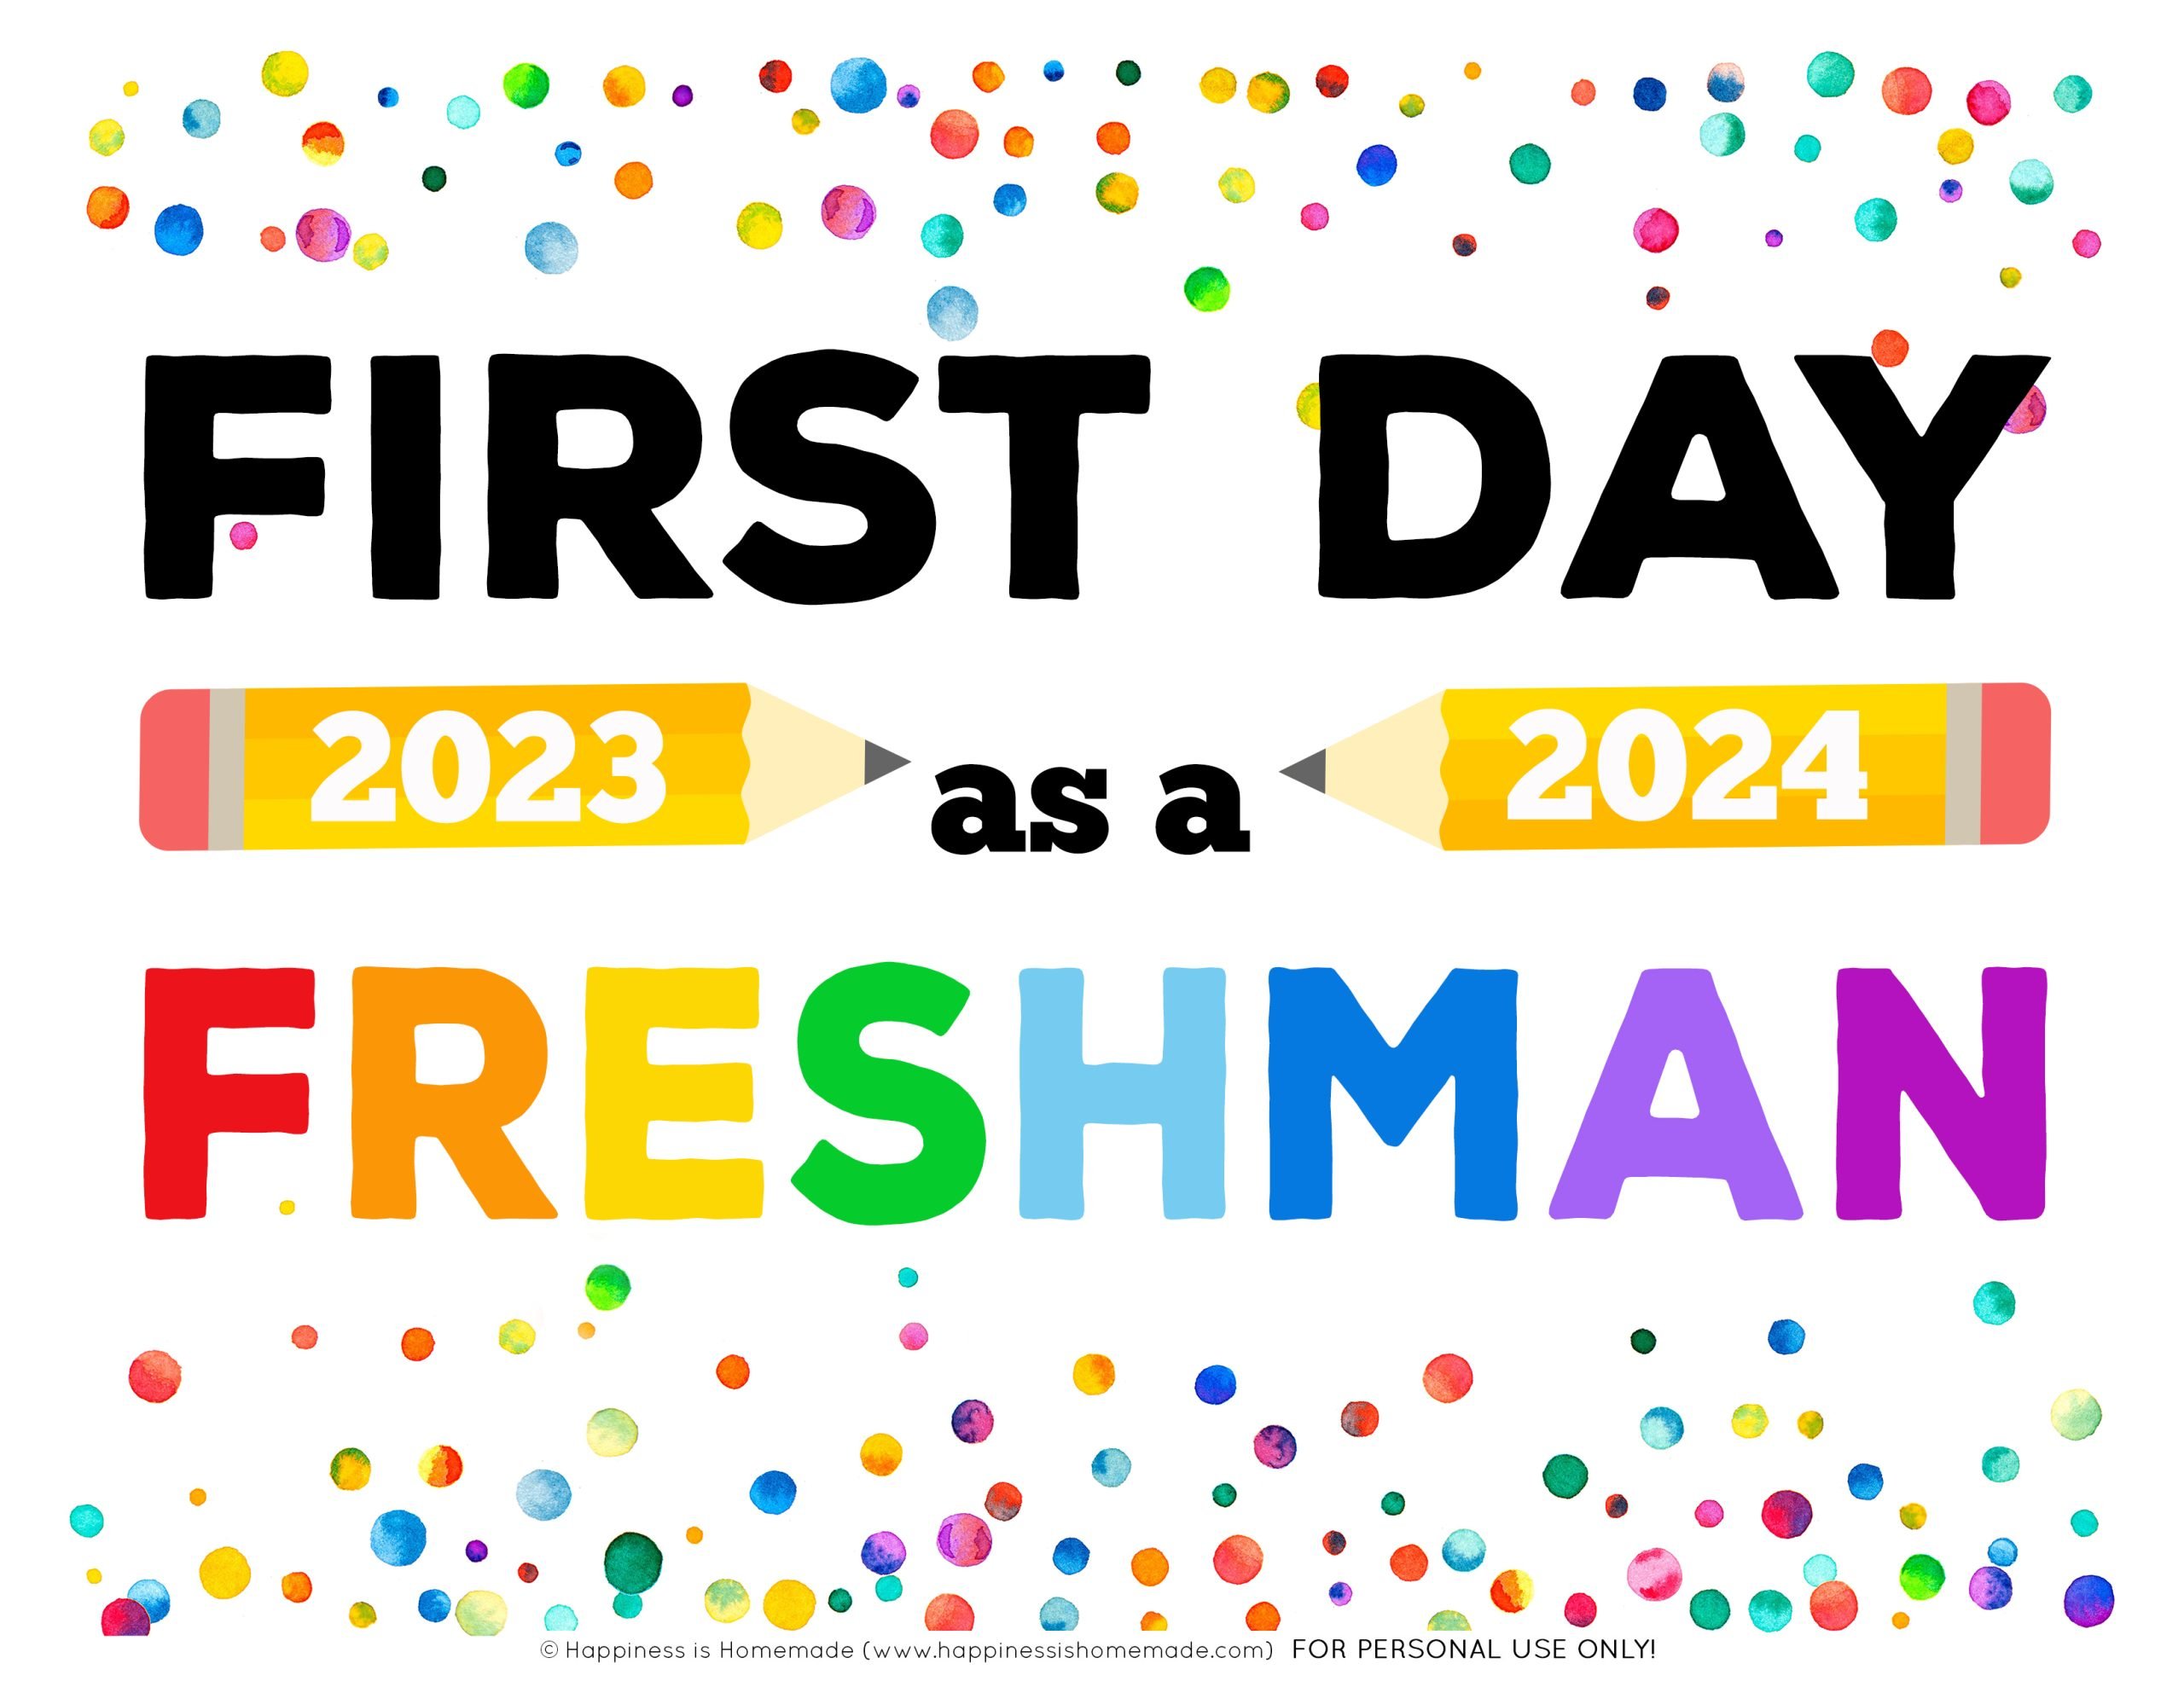 Graphic of Free Printable First Day as a Freshman sign 2023 - 2024